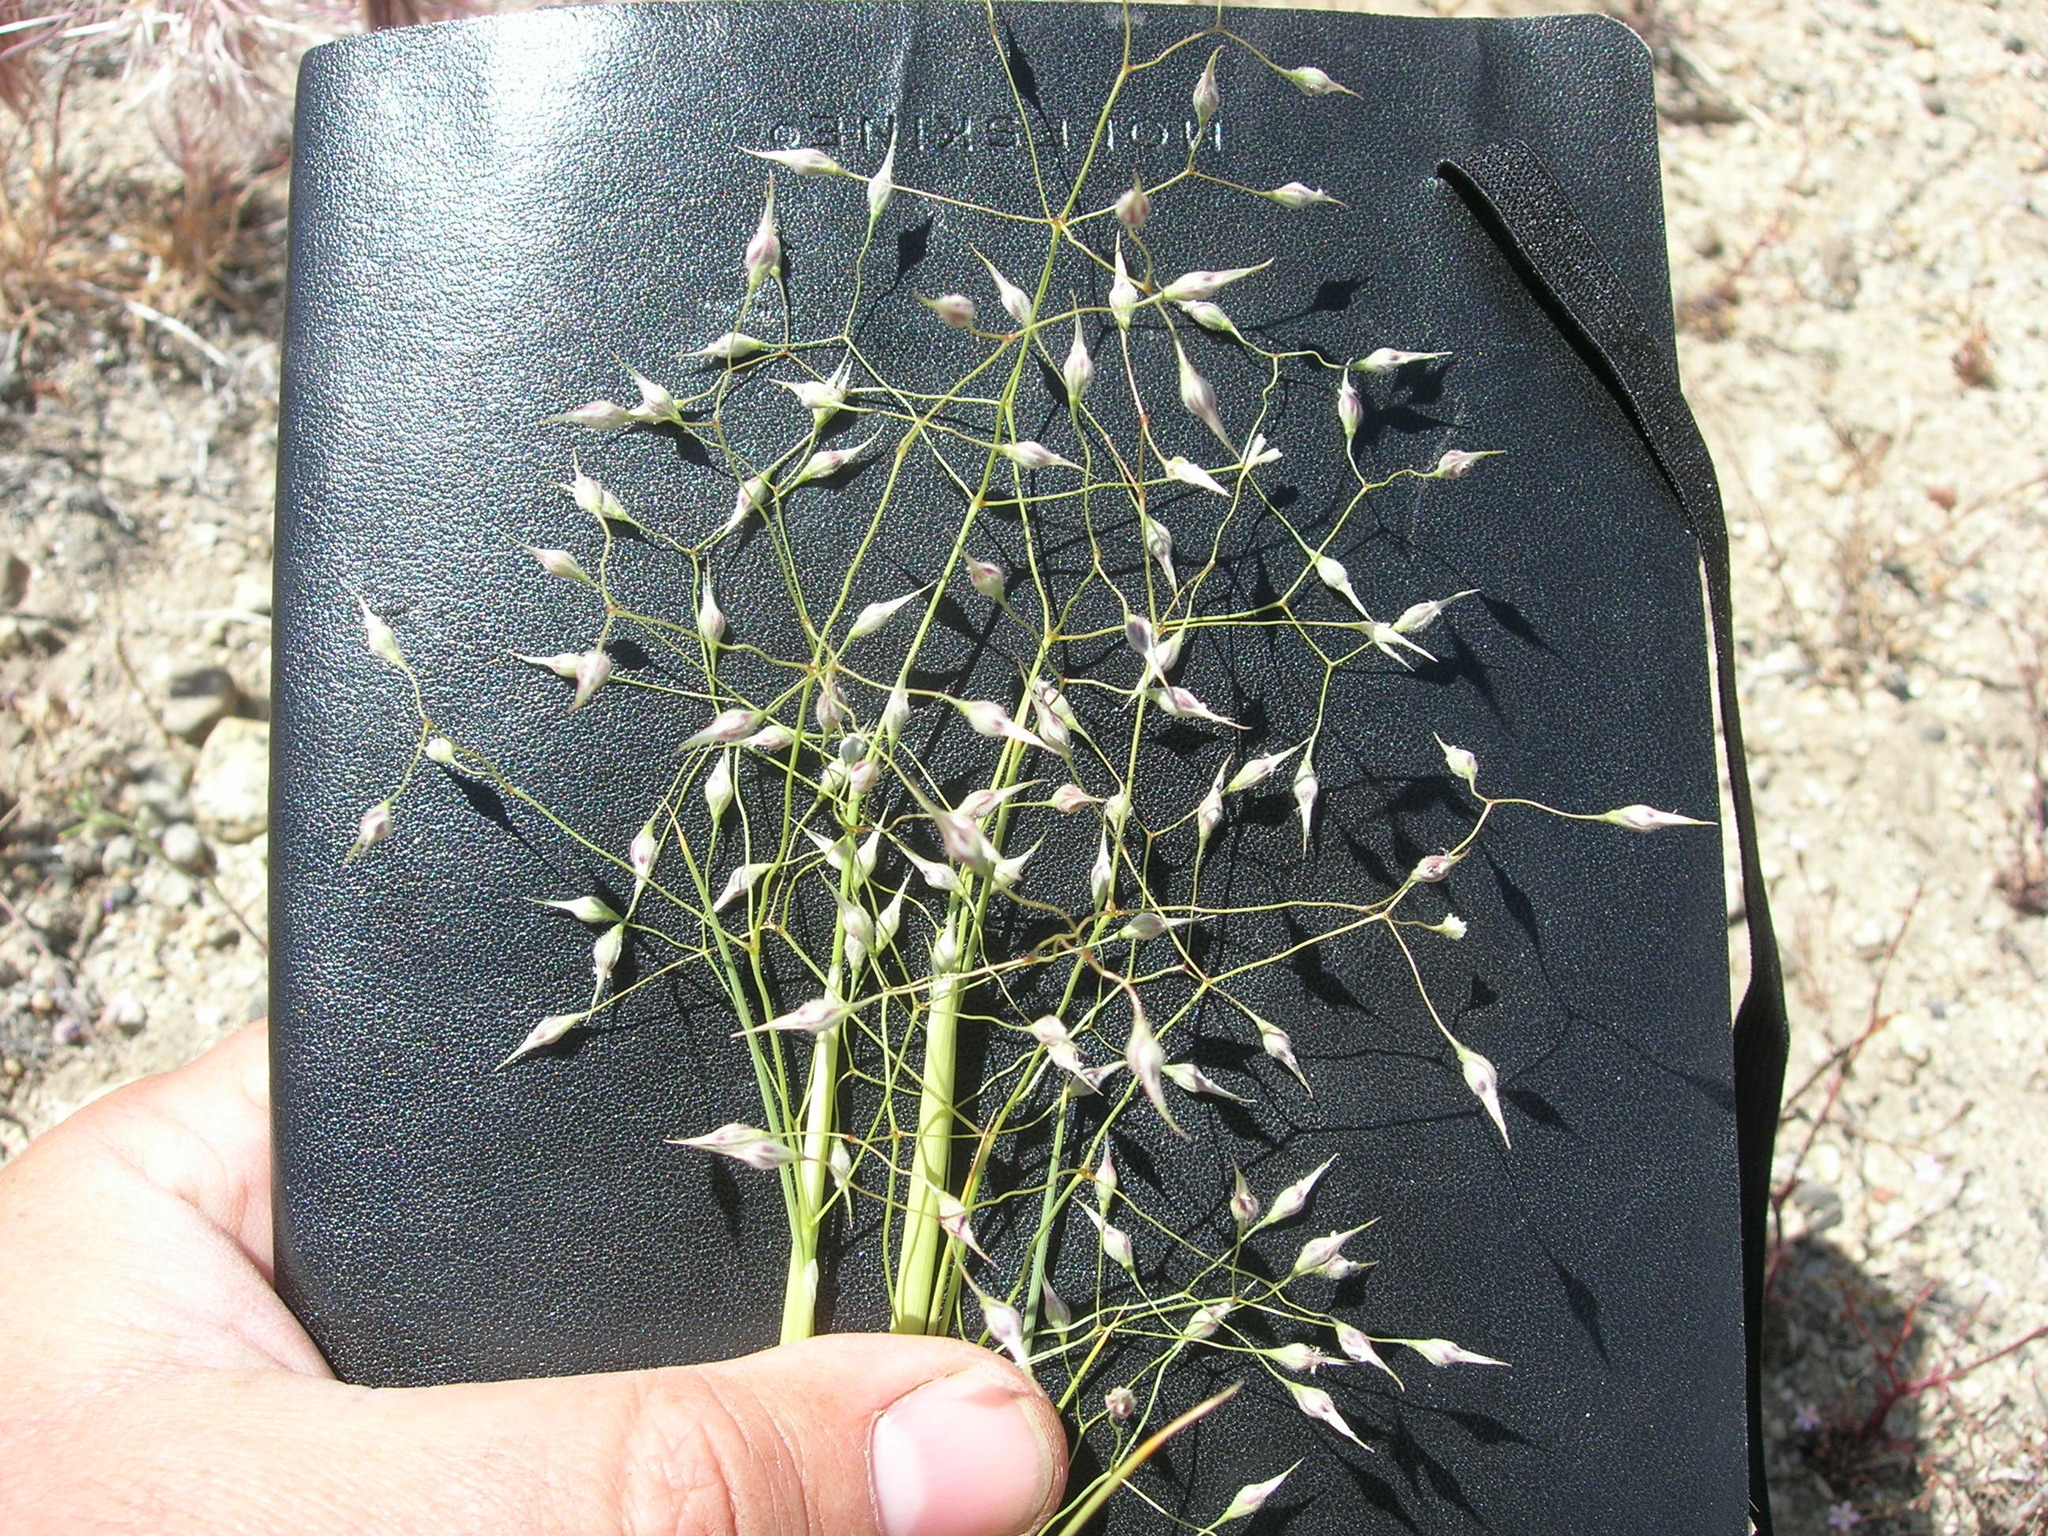 Indian Rice Grass  Dried Grasses & Flowers at